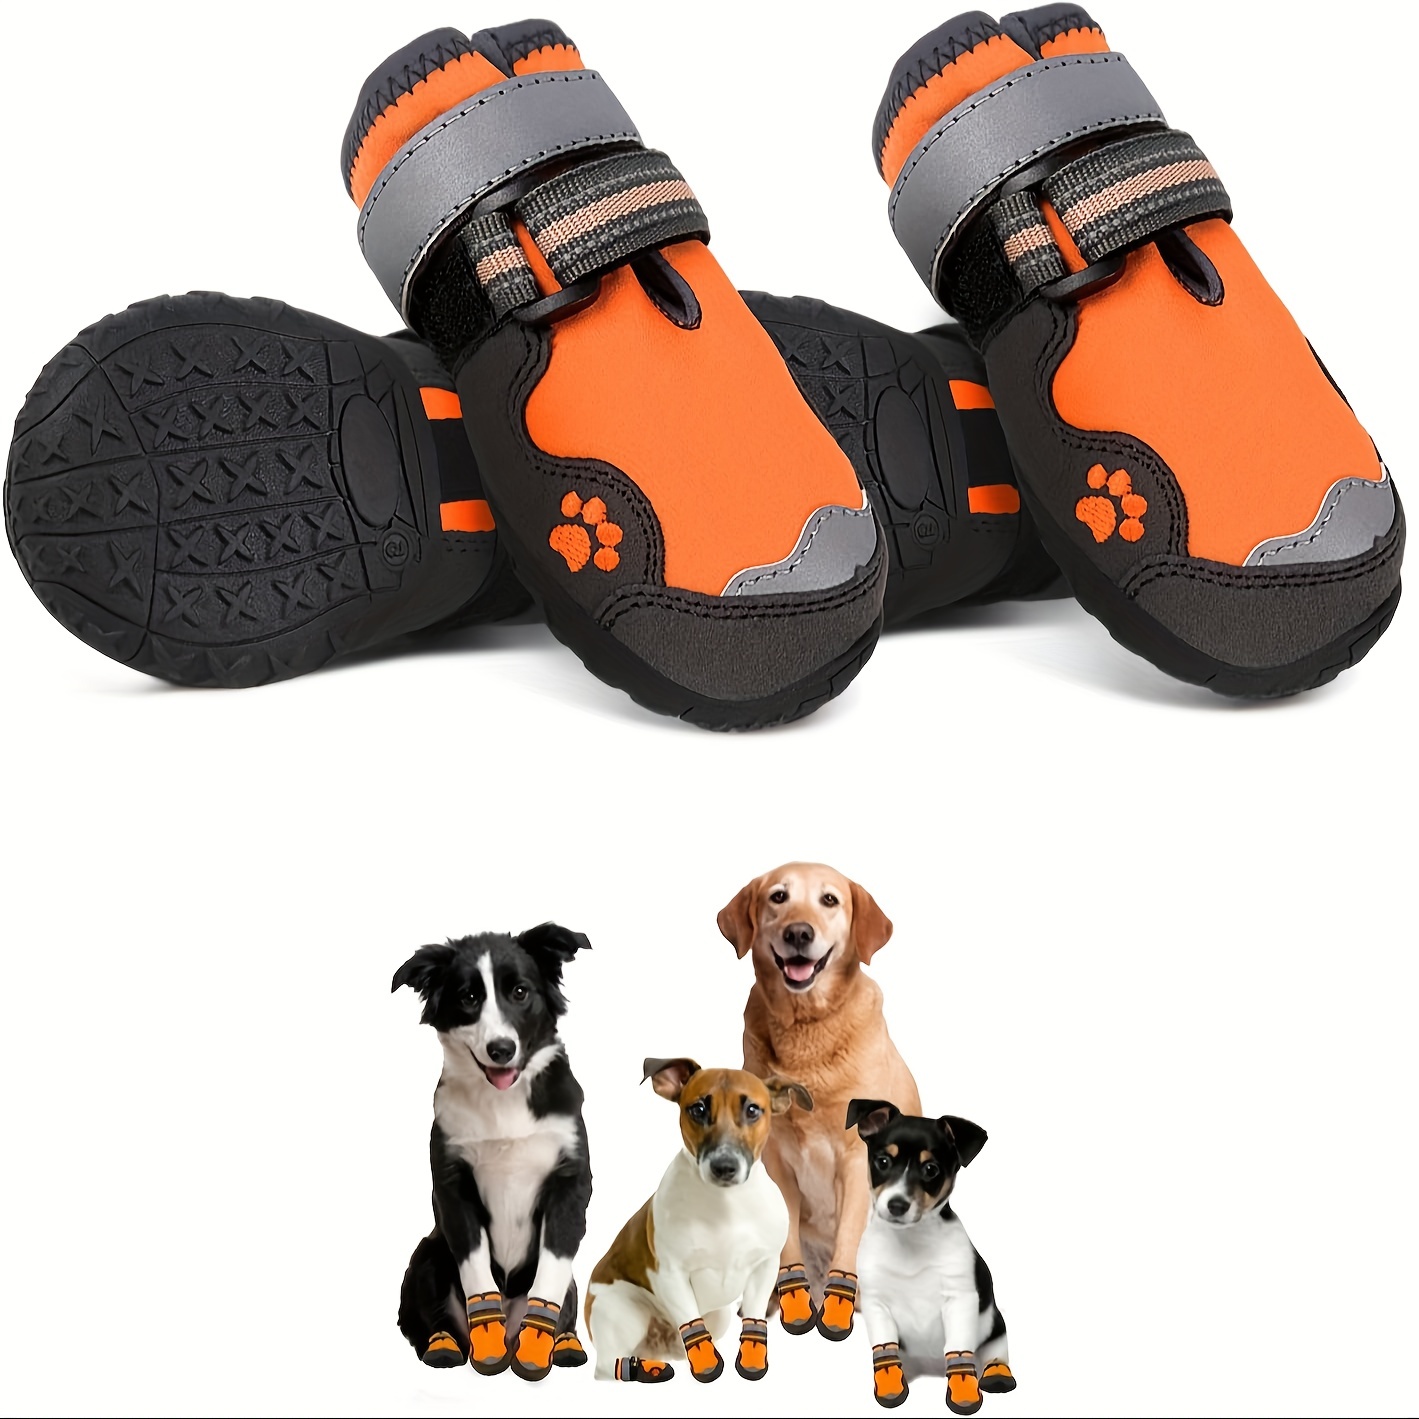 Double Side Anti Slip Dog Socks For Medium And Large Dogs Dog Shoes For Hot  Pavement